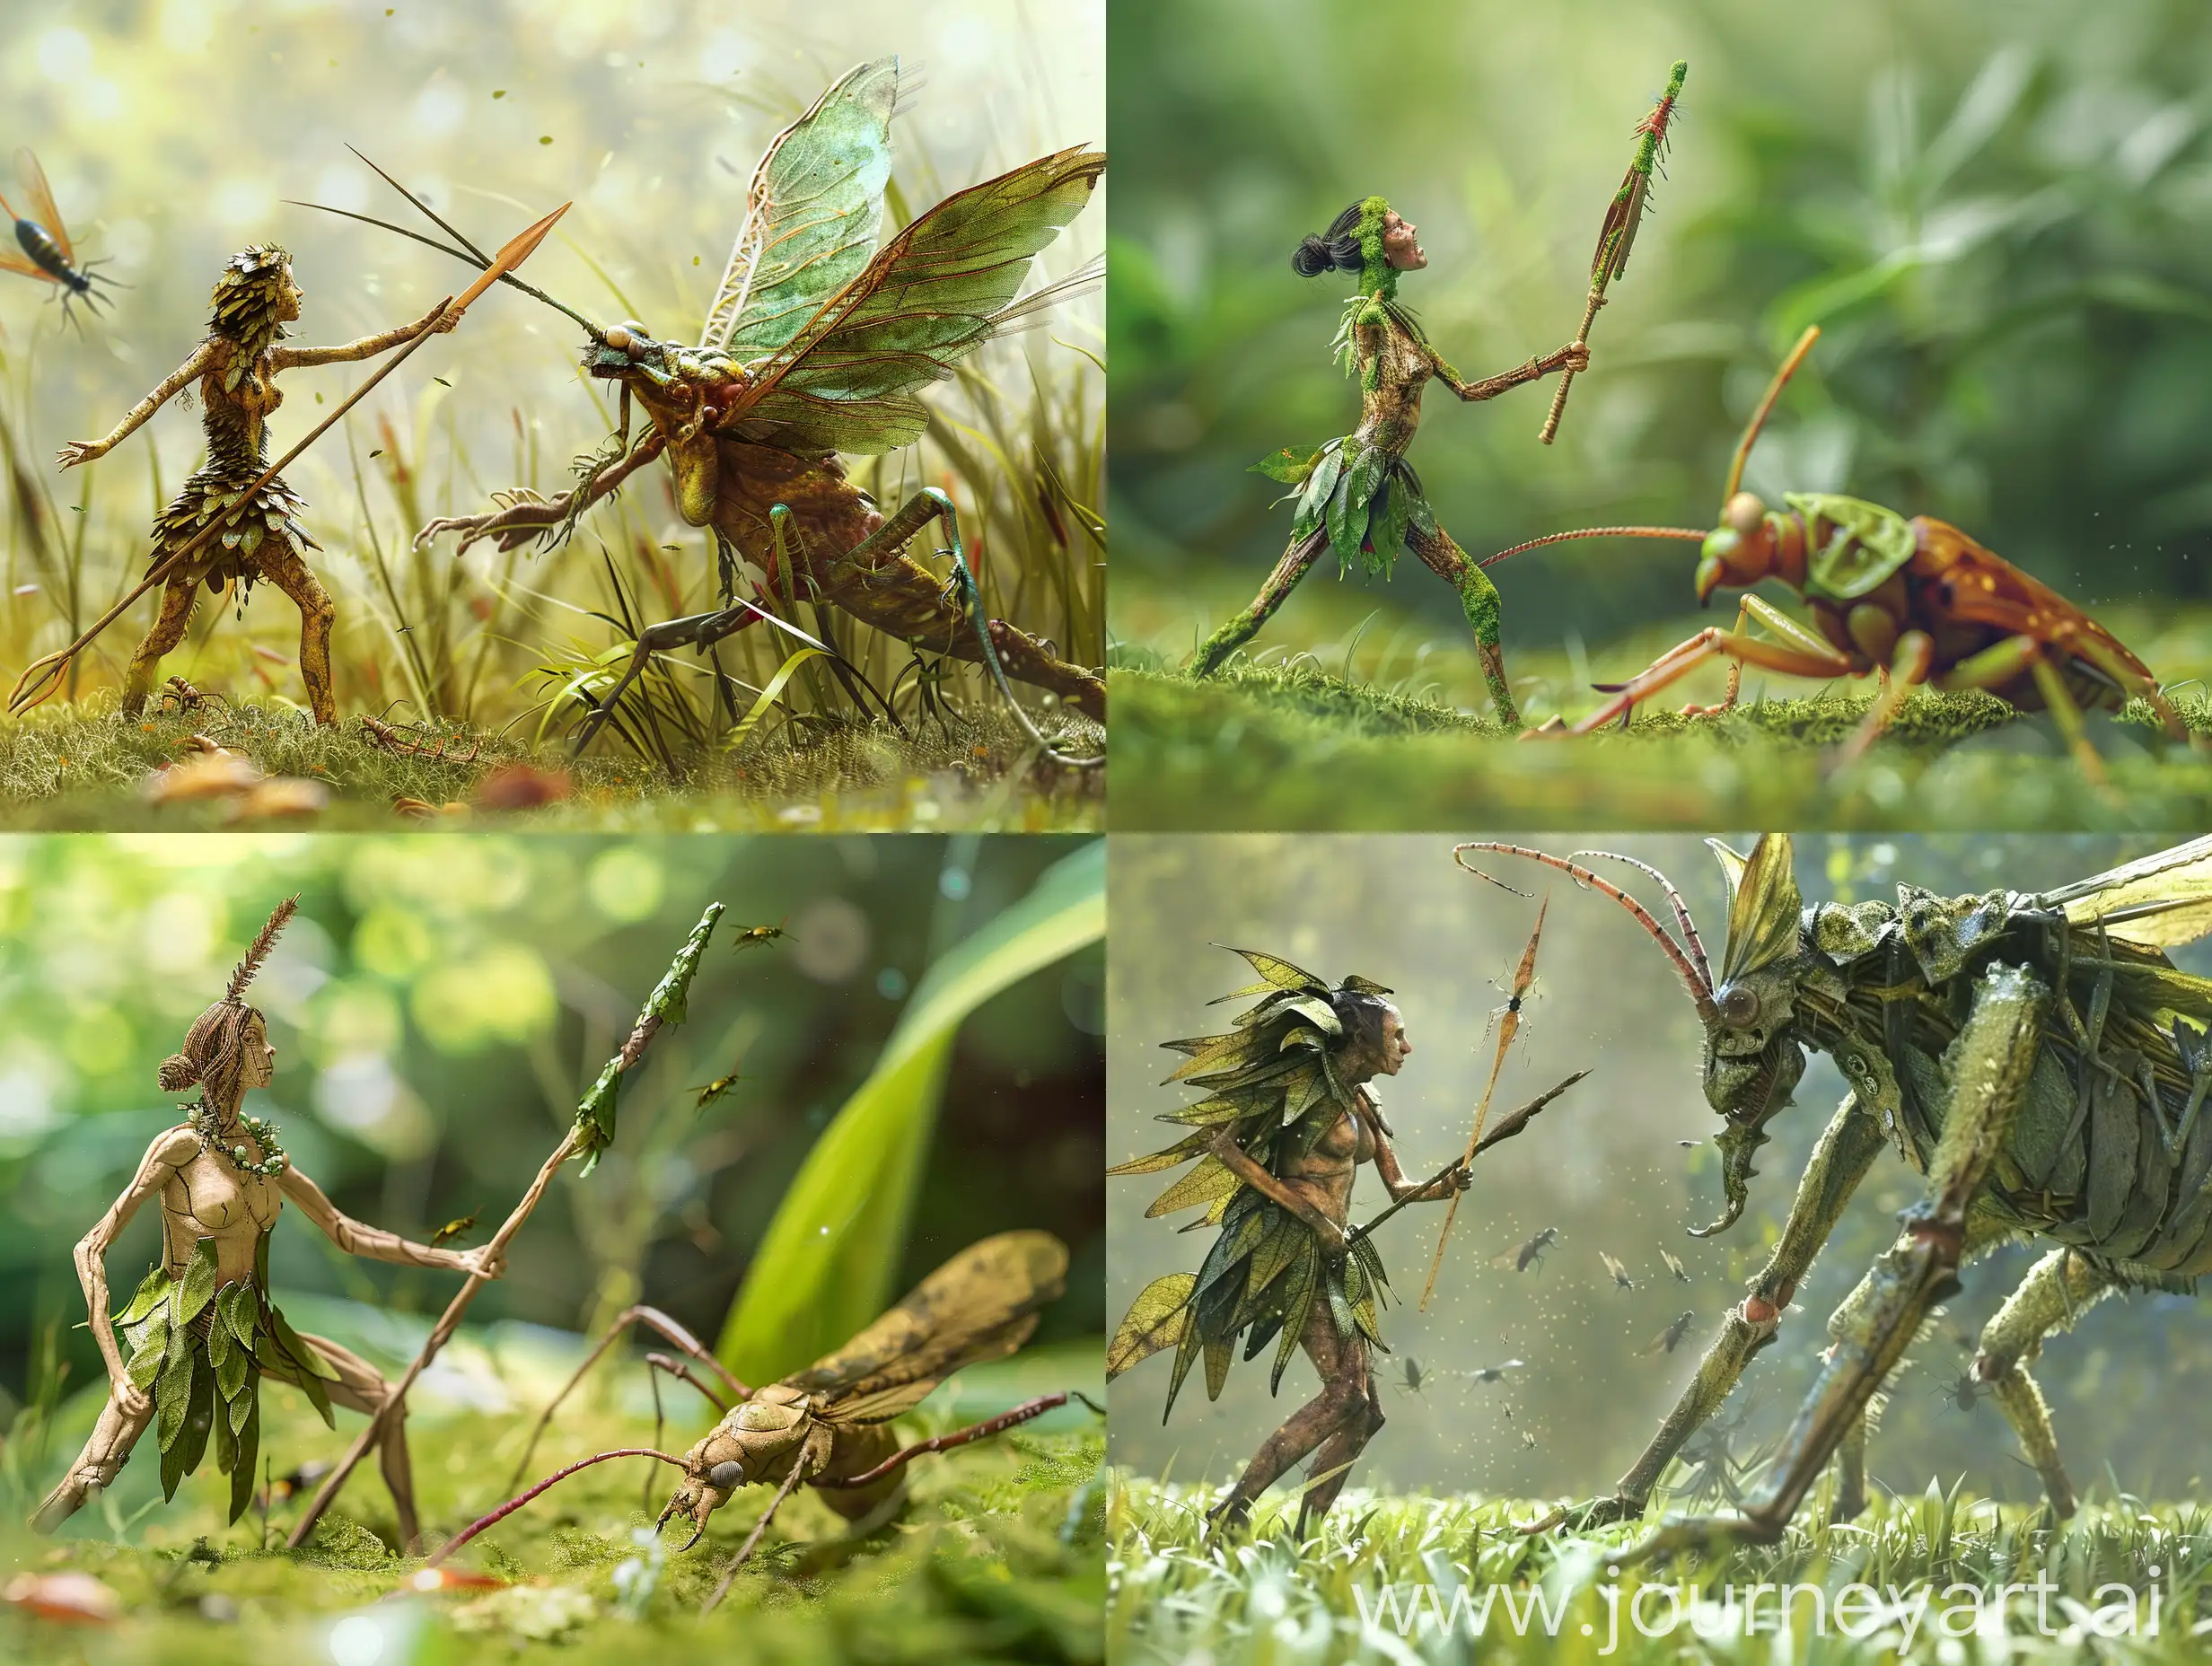 Fantasy-Survival-Microscopic-Woman-in-Leaf-Loincloth-Faces-Giant-Insect-Threat